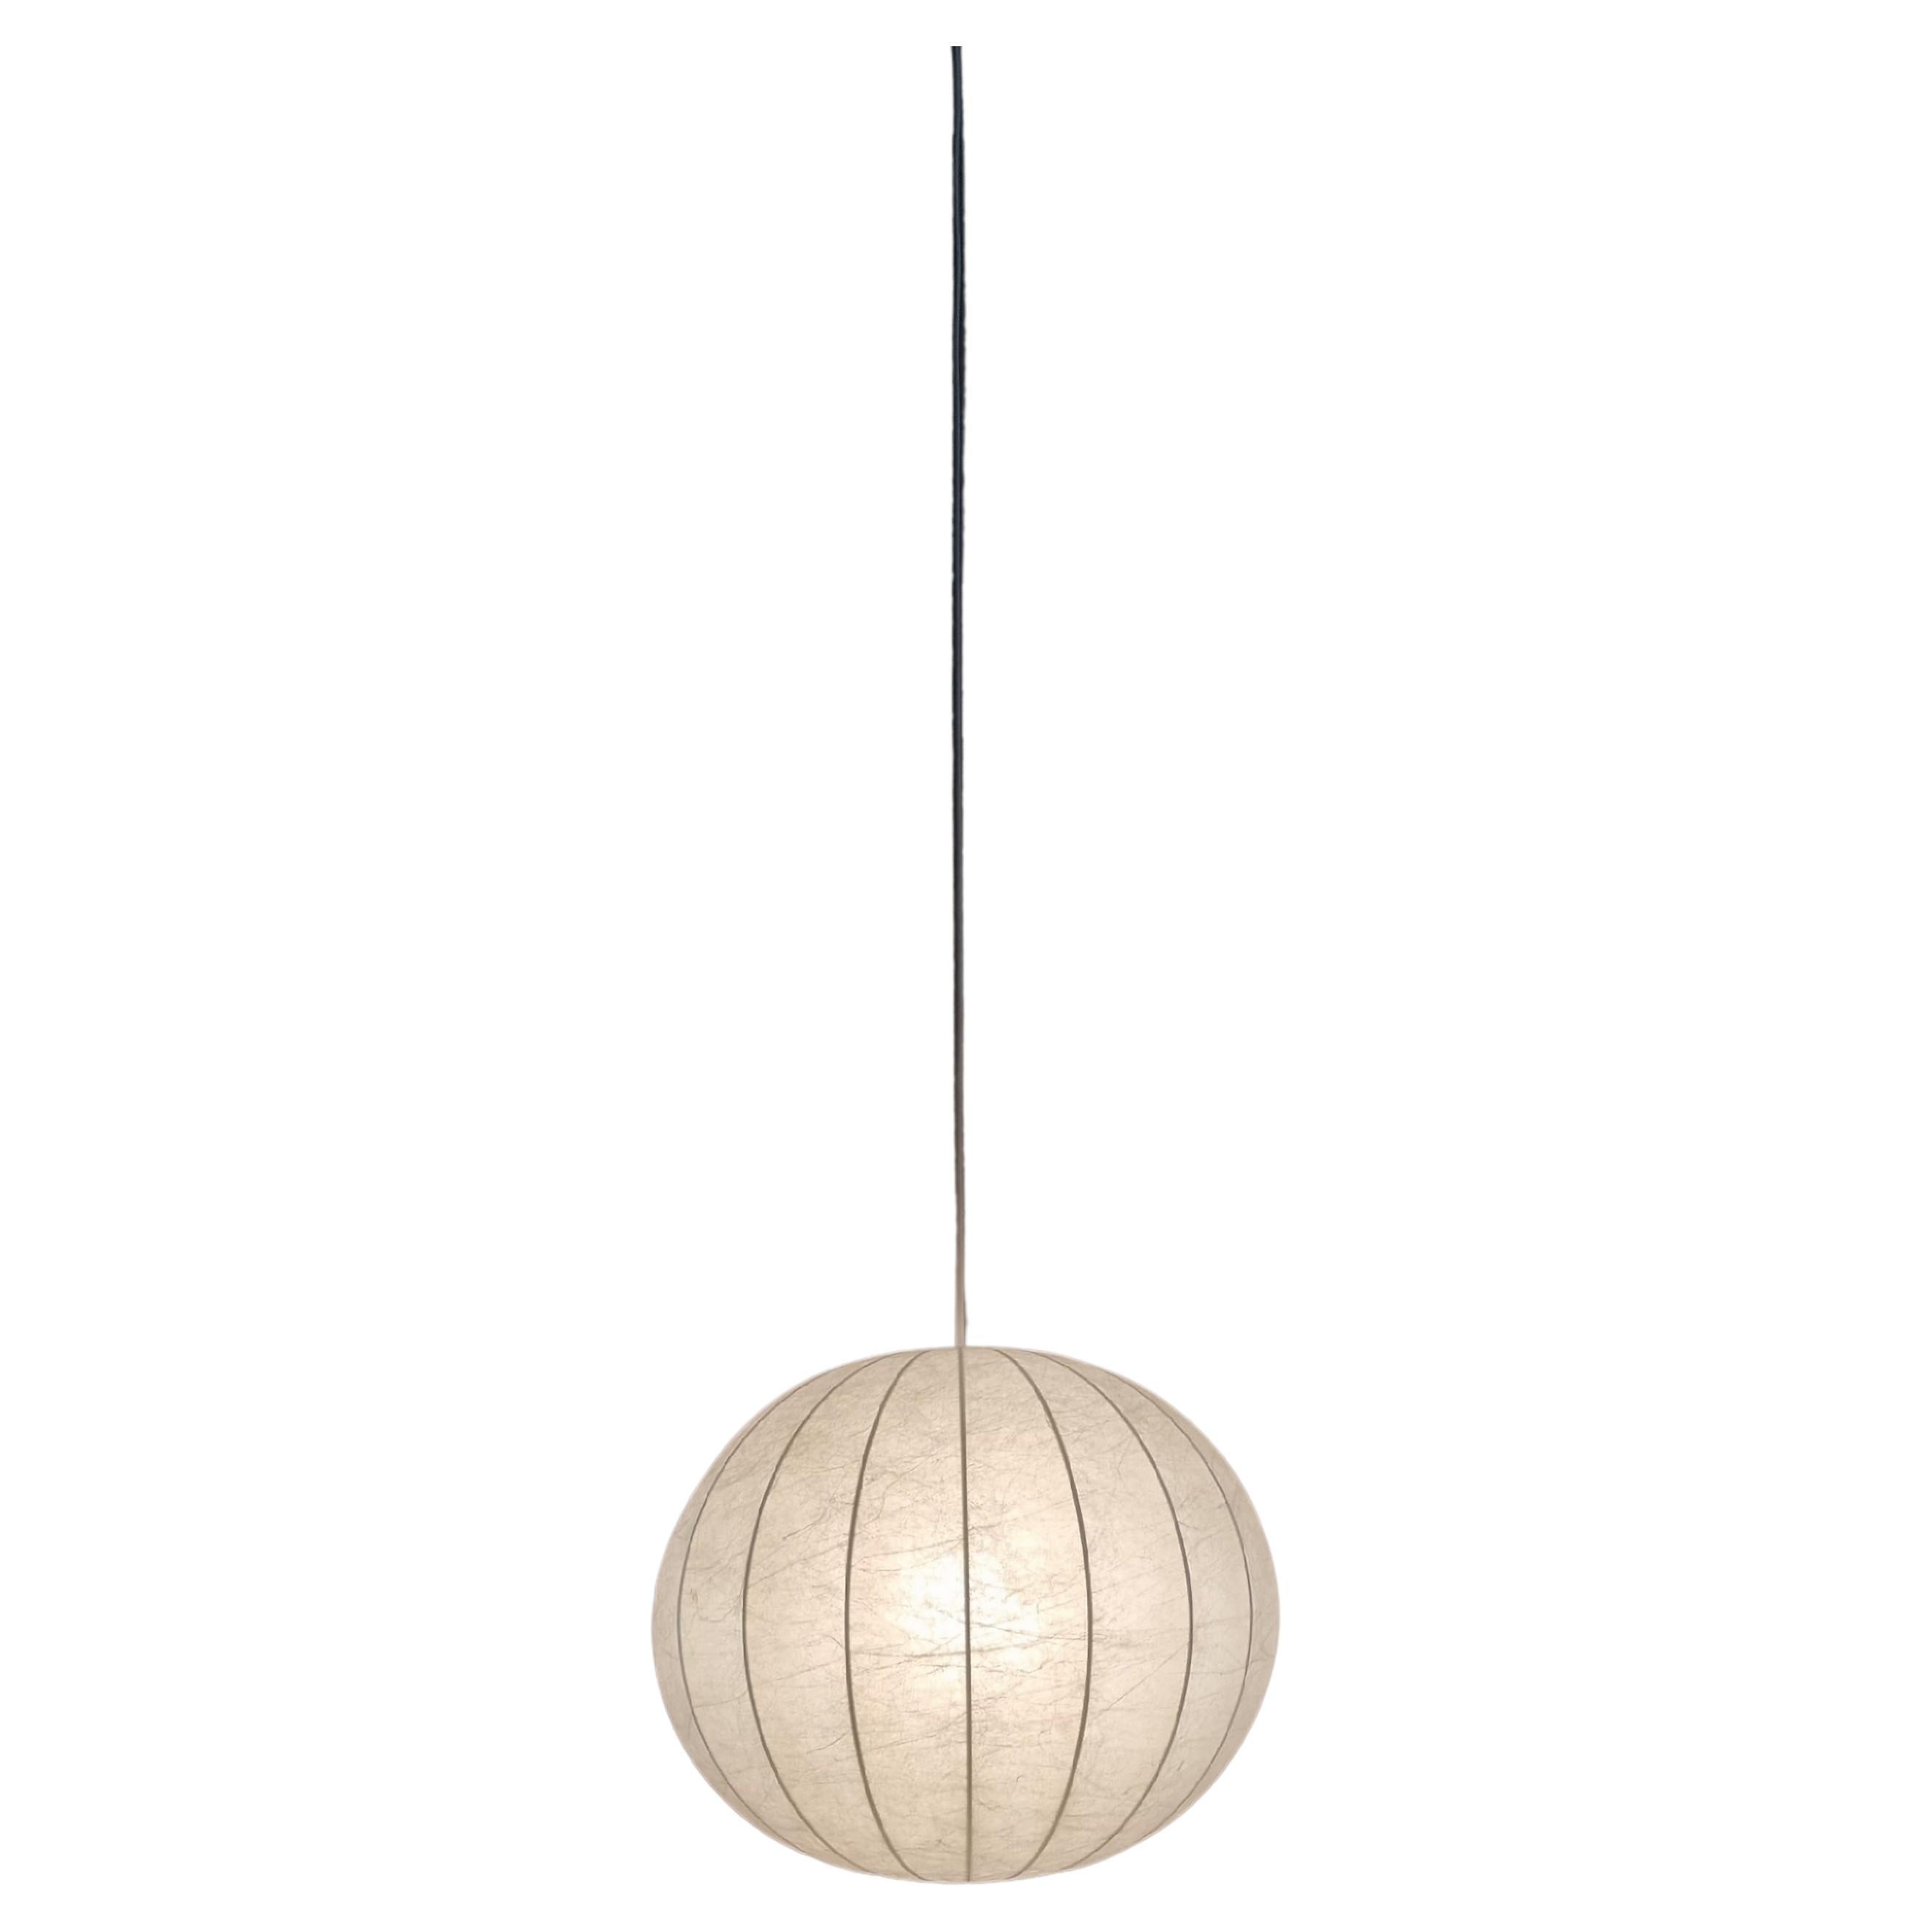 Cocoon Suspension Lamp, Italian Manufacture, 1960s For Sale